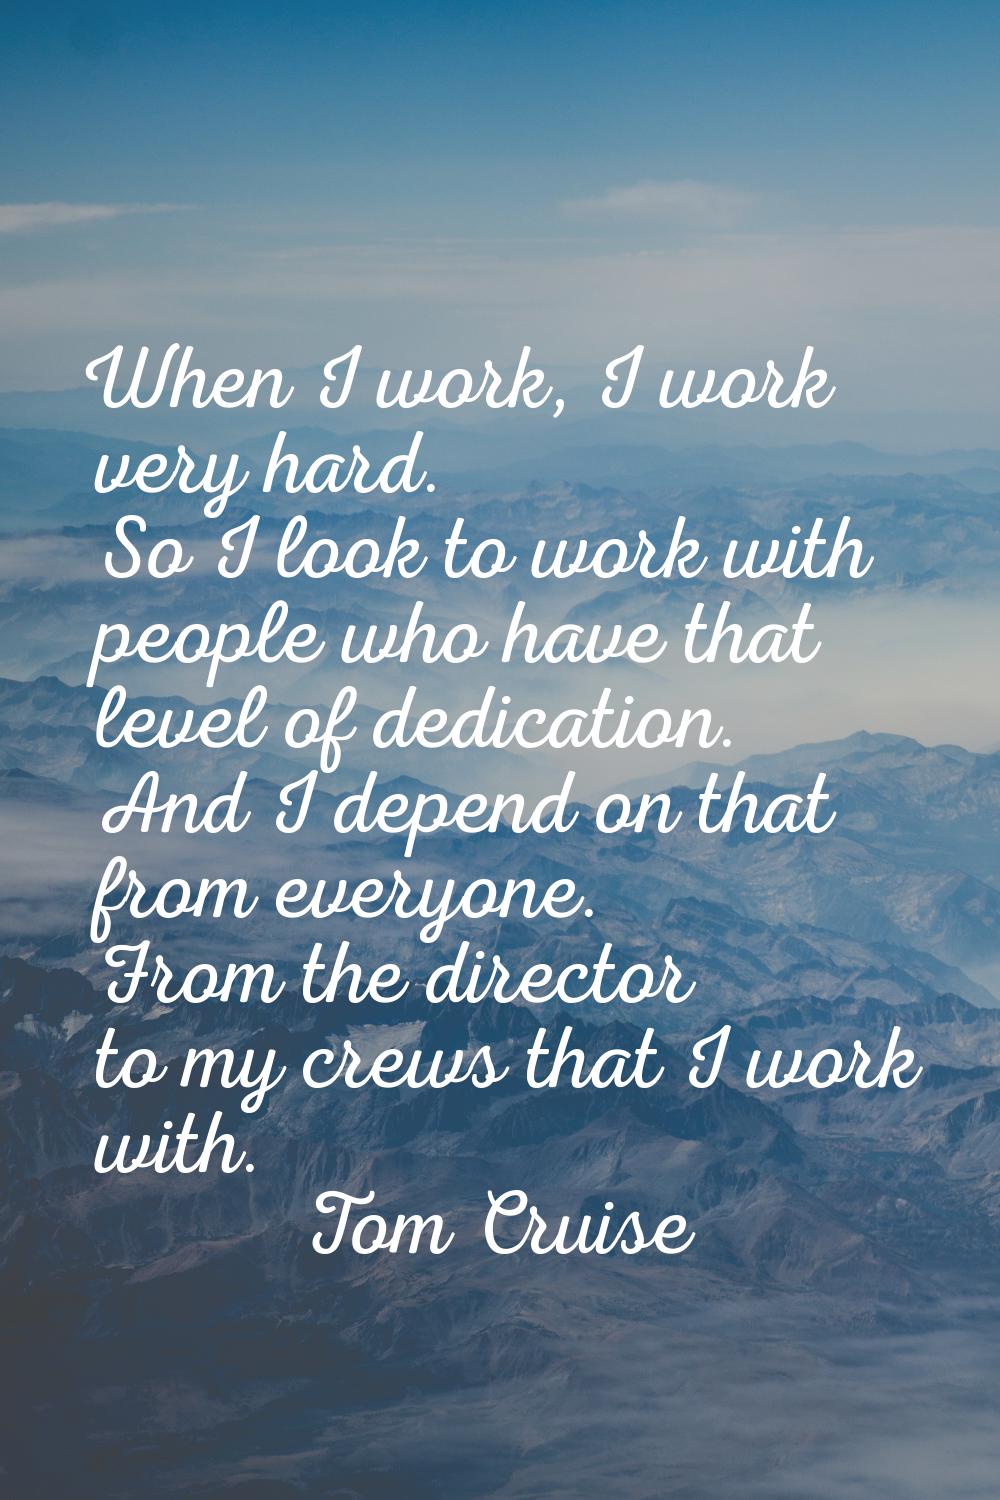 When I work, I work very hard. So I look to work with people who have that level of dedication. And